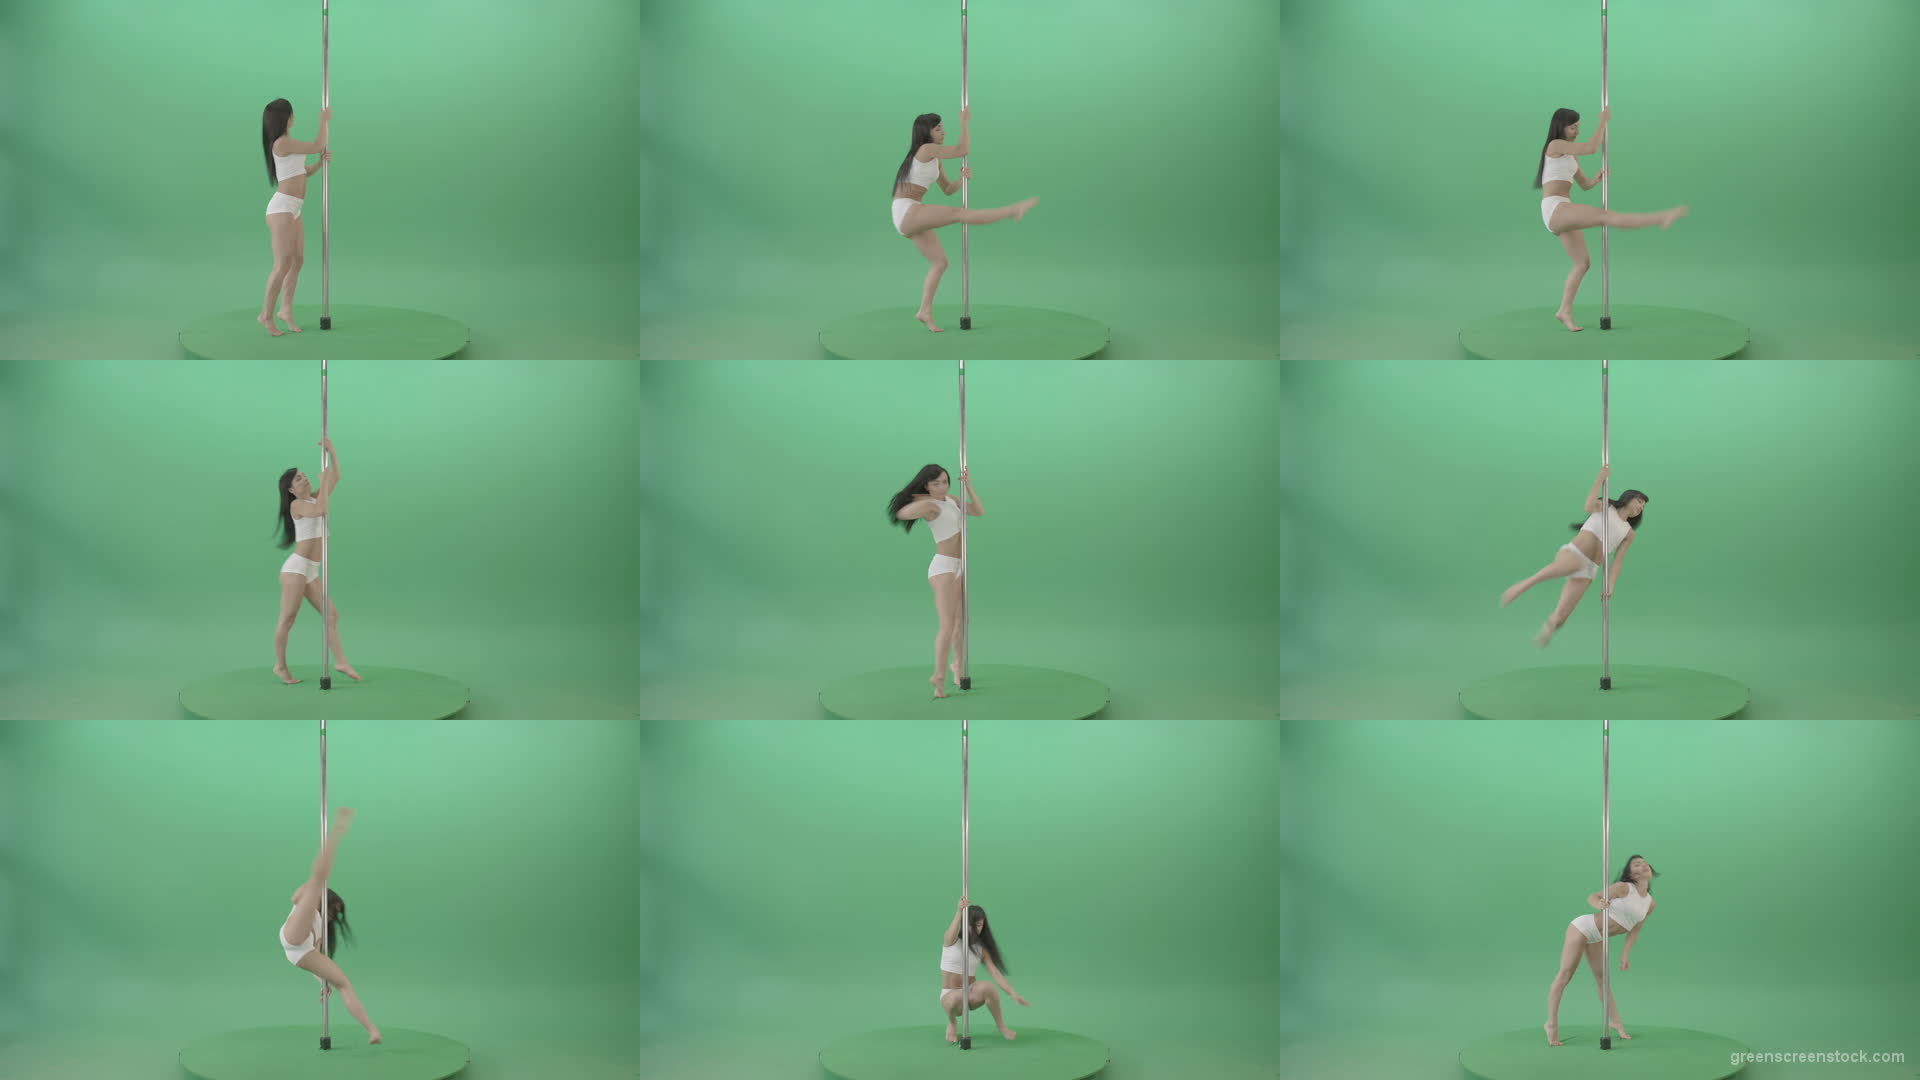 Sexy-moves-by-pole-dance-girl-dancing-on-green-screen-Video-Footage-1920 Green Screen Stock